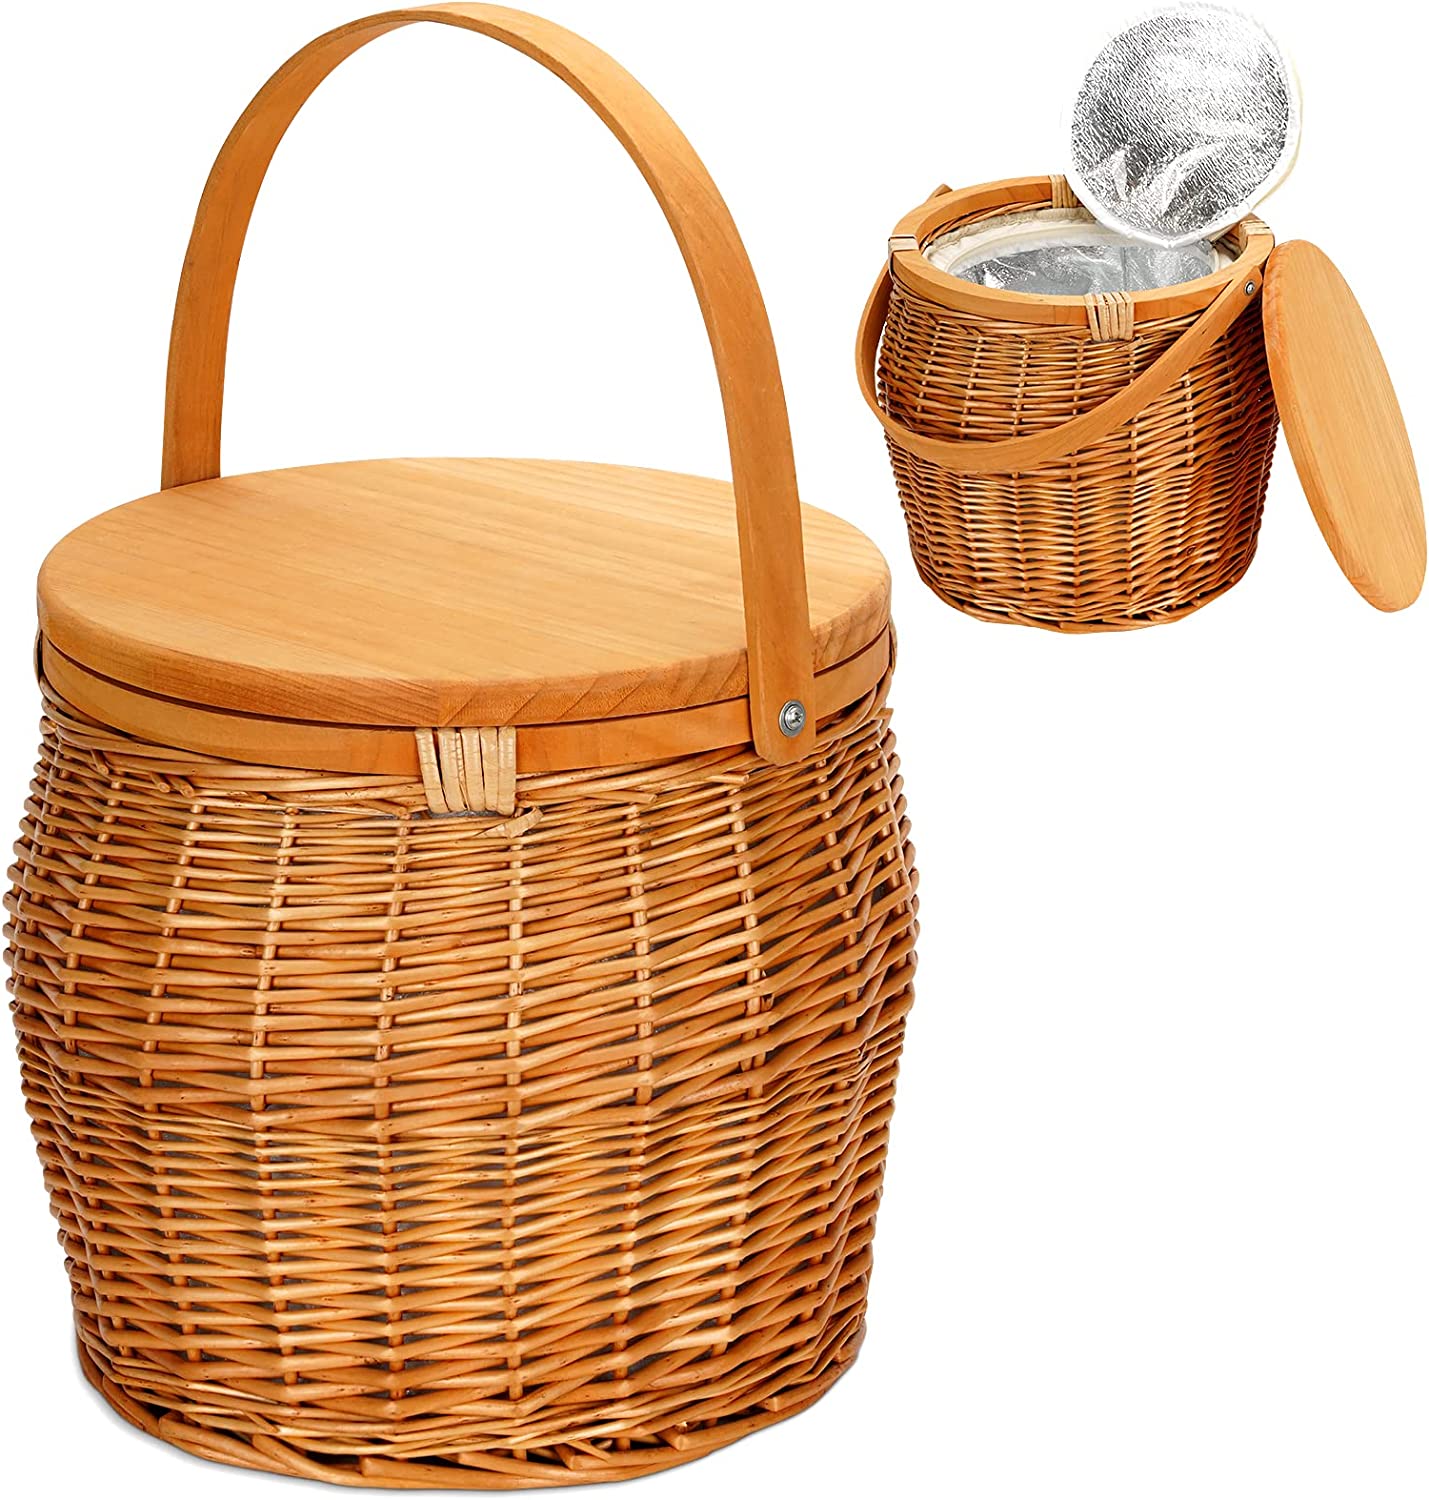 Camping Willow Picnic Cooler Basket with Removable Lid Perfect for Picnic Round Wooden Handles Wicker Basket Insulated Interior with Zip Close 